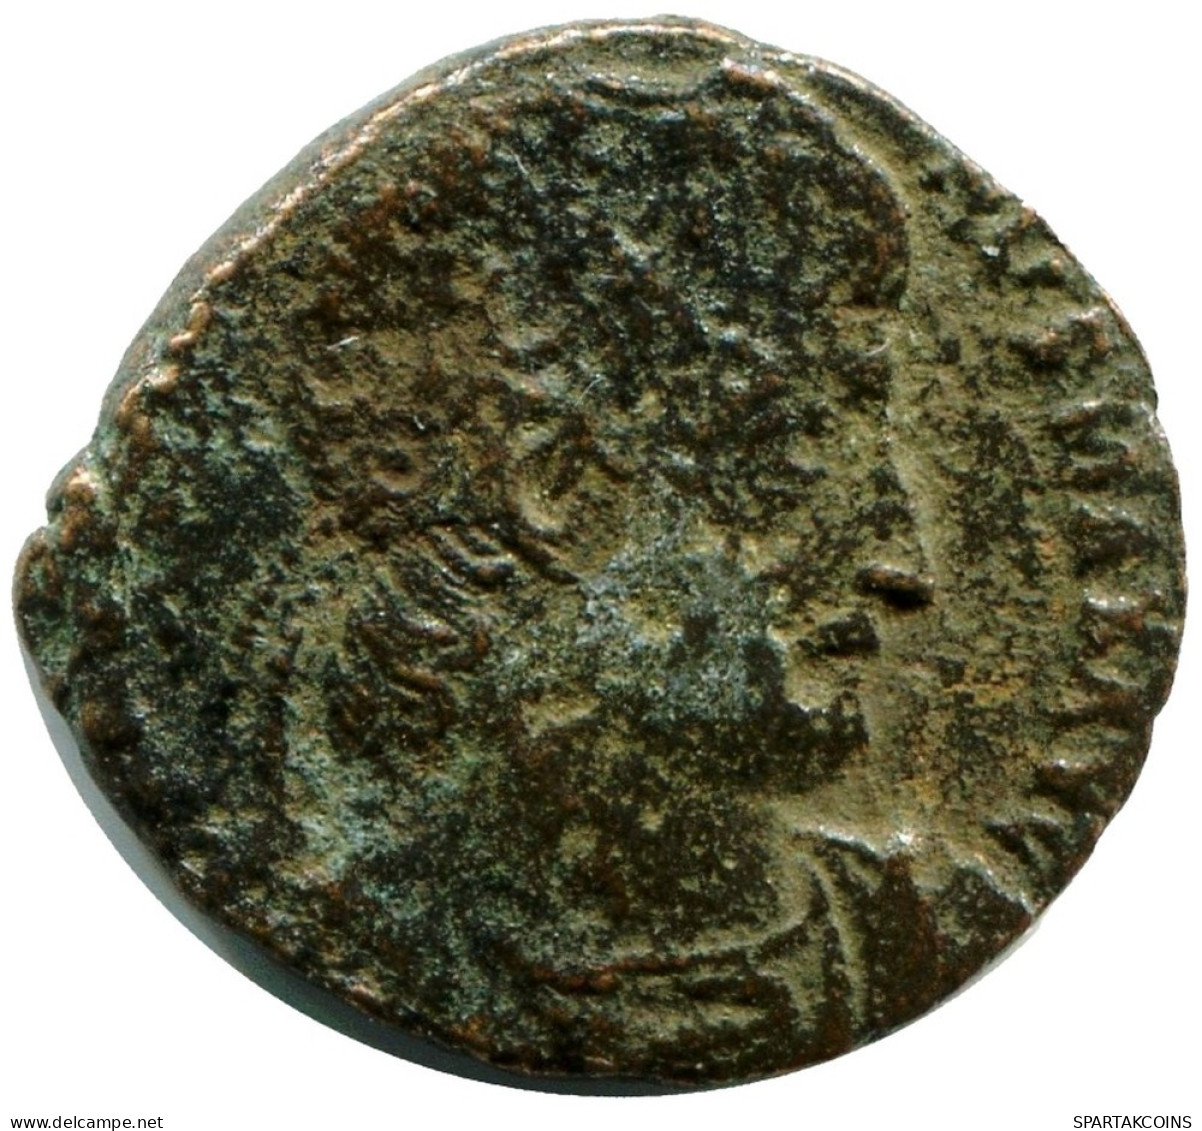 CONSTANTINE I MINTED IN ROME ITALY FROM THE ROYAL ONTARIO MUSEUM #ANC11184.14.D.A - El Impero Christiano (307 / 363)